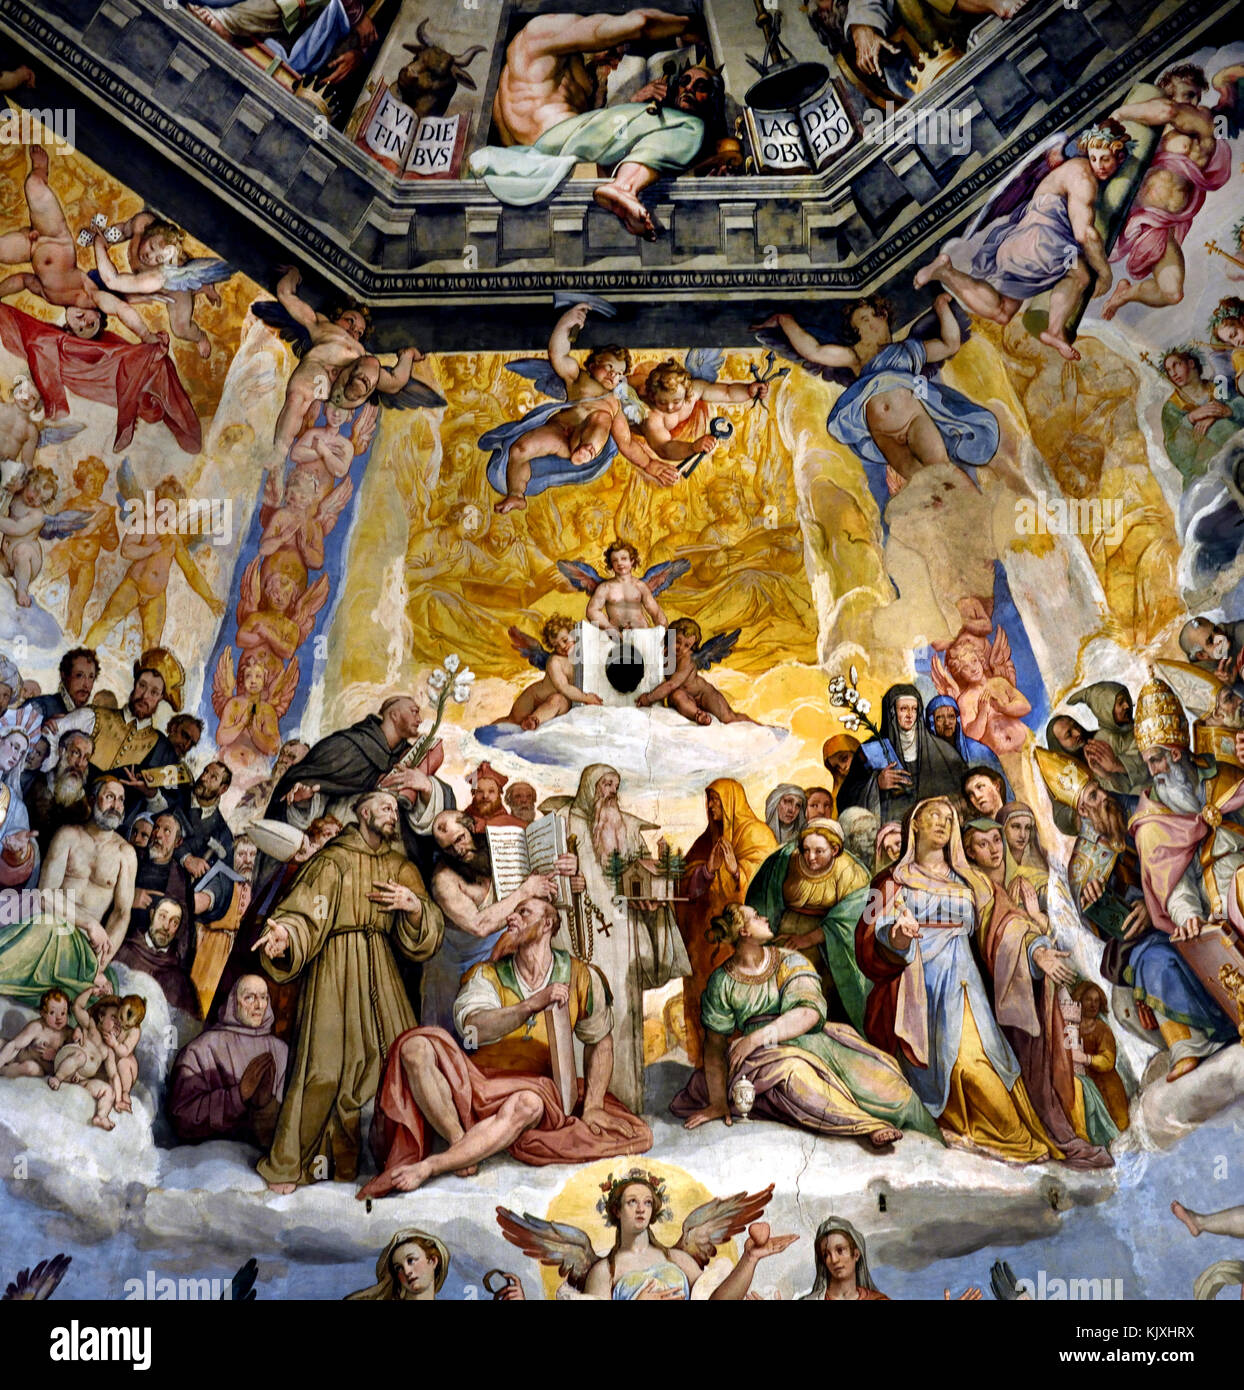 Giorgio Vasari, The Last Judgment (detail), 1572-79,by Giorgio Vasari  1511 –1574 ,  Duomo, di Firenze ( The Cattedrale di Santa Maria del Fiore of Florence - Cathedral of Saint Mary of the Flower  1336 )  Florence Italy Italian. Stock Photo